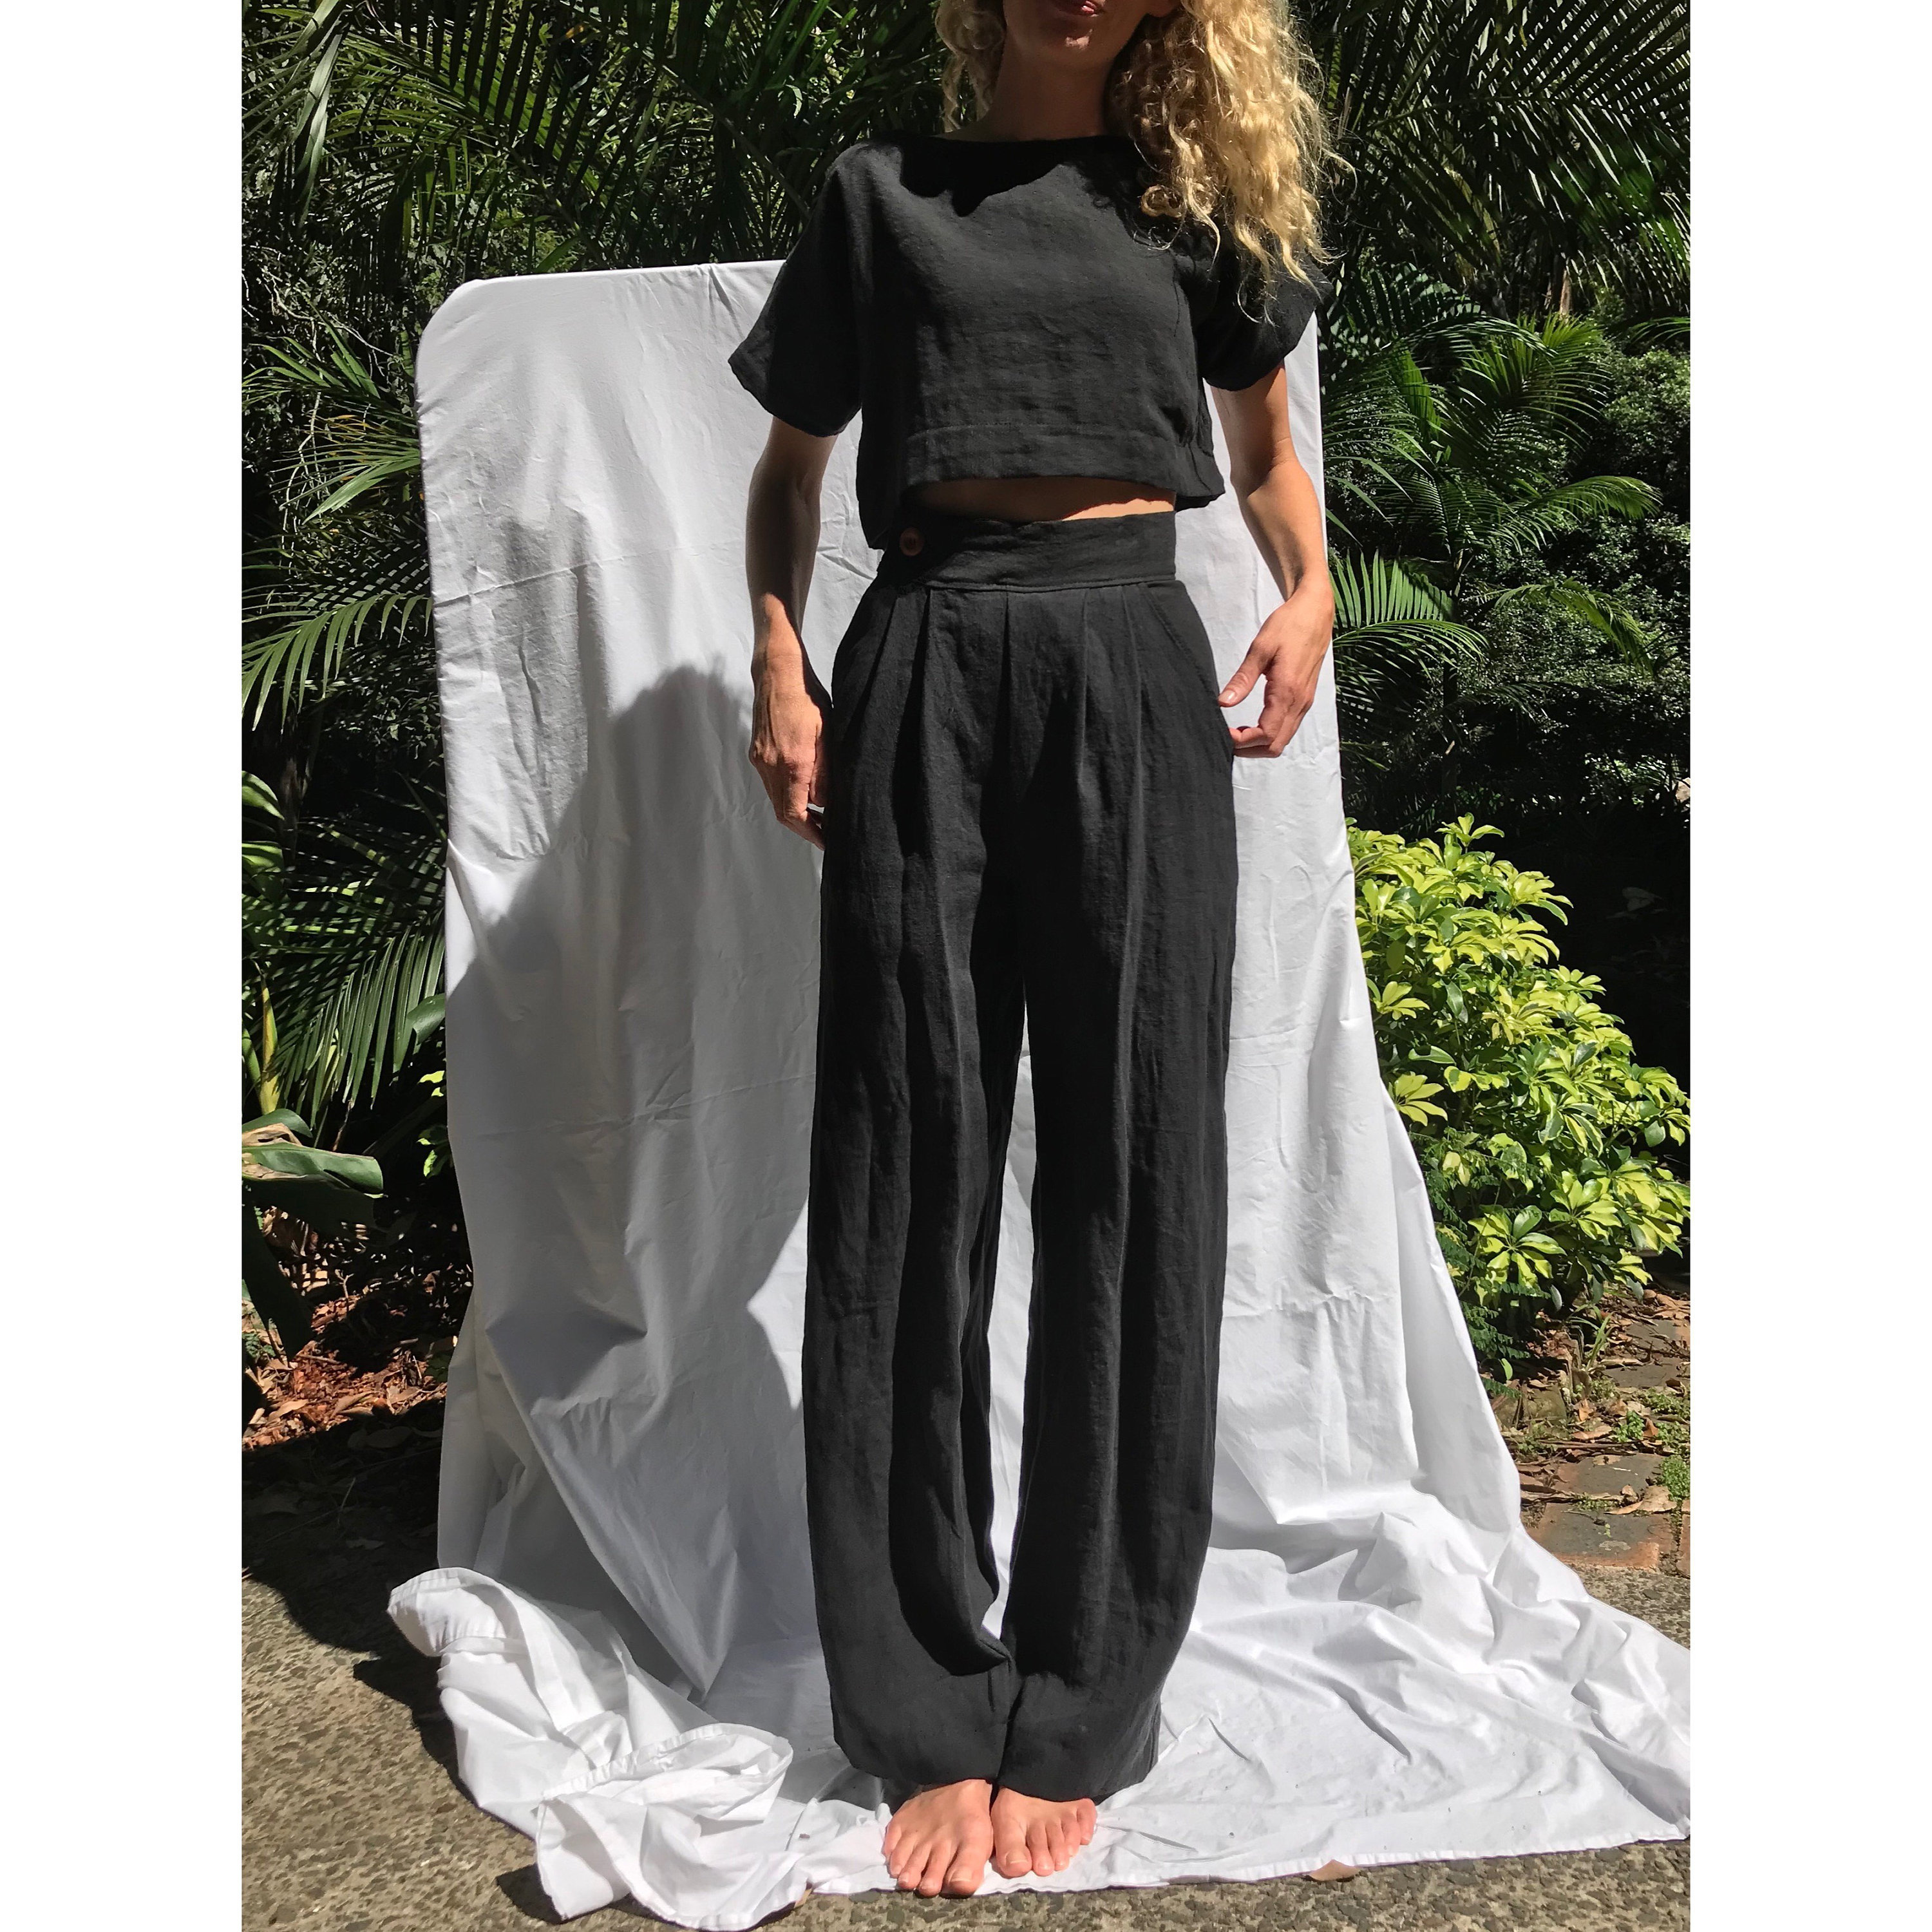 THE TAILORED TROUSER Black Linen High Waisted Custom Fit Pleated Trouser  Vintage Style Wide Straight Leg Slow Fashion Minimal 